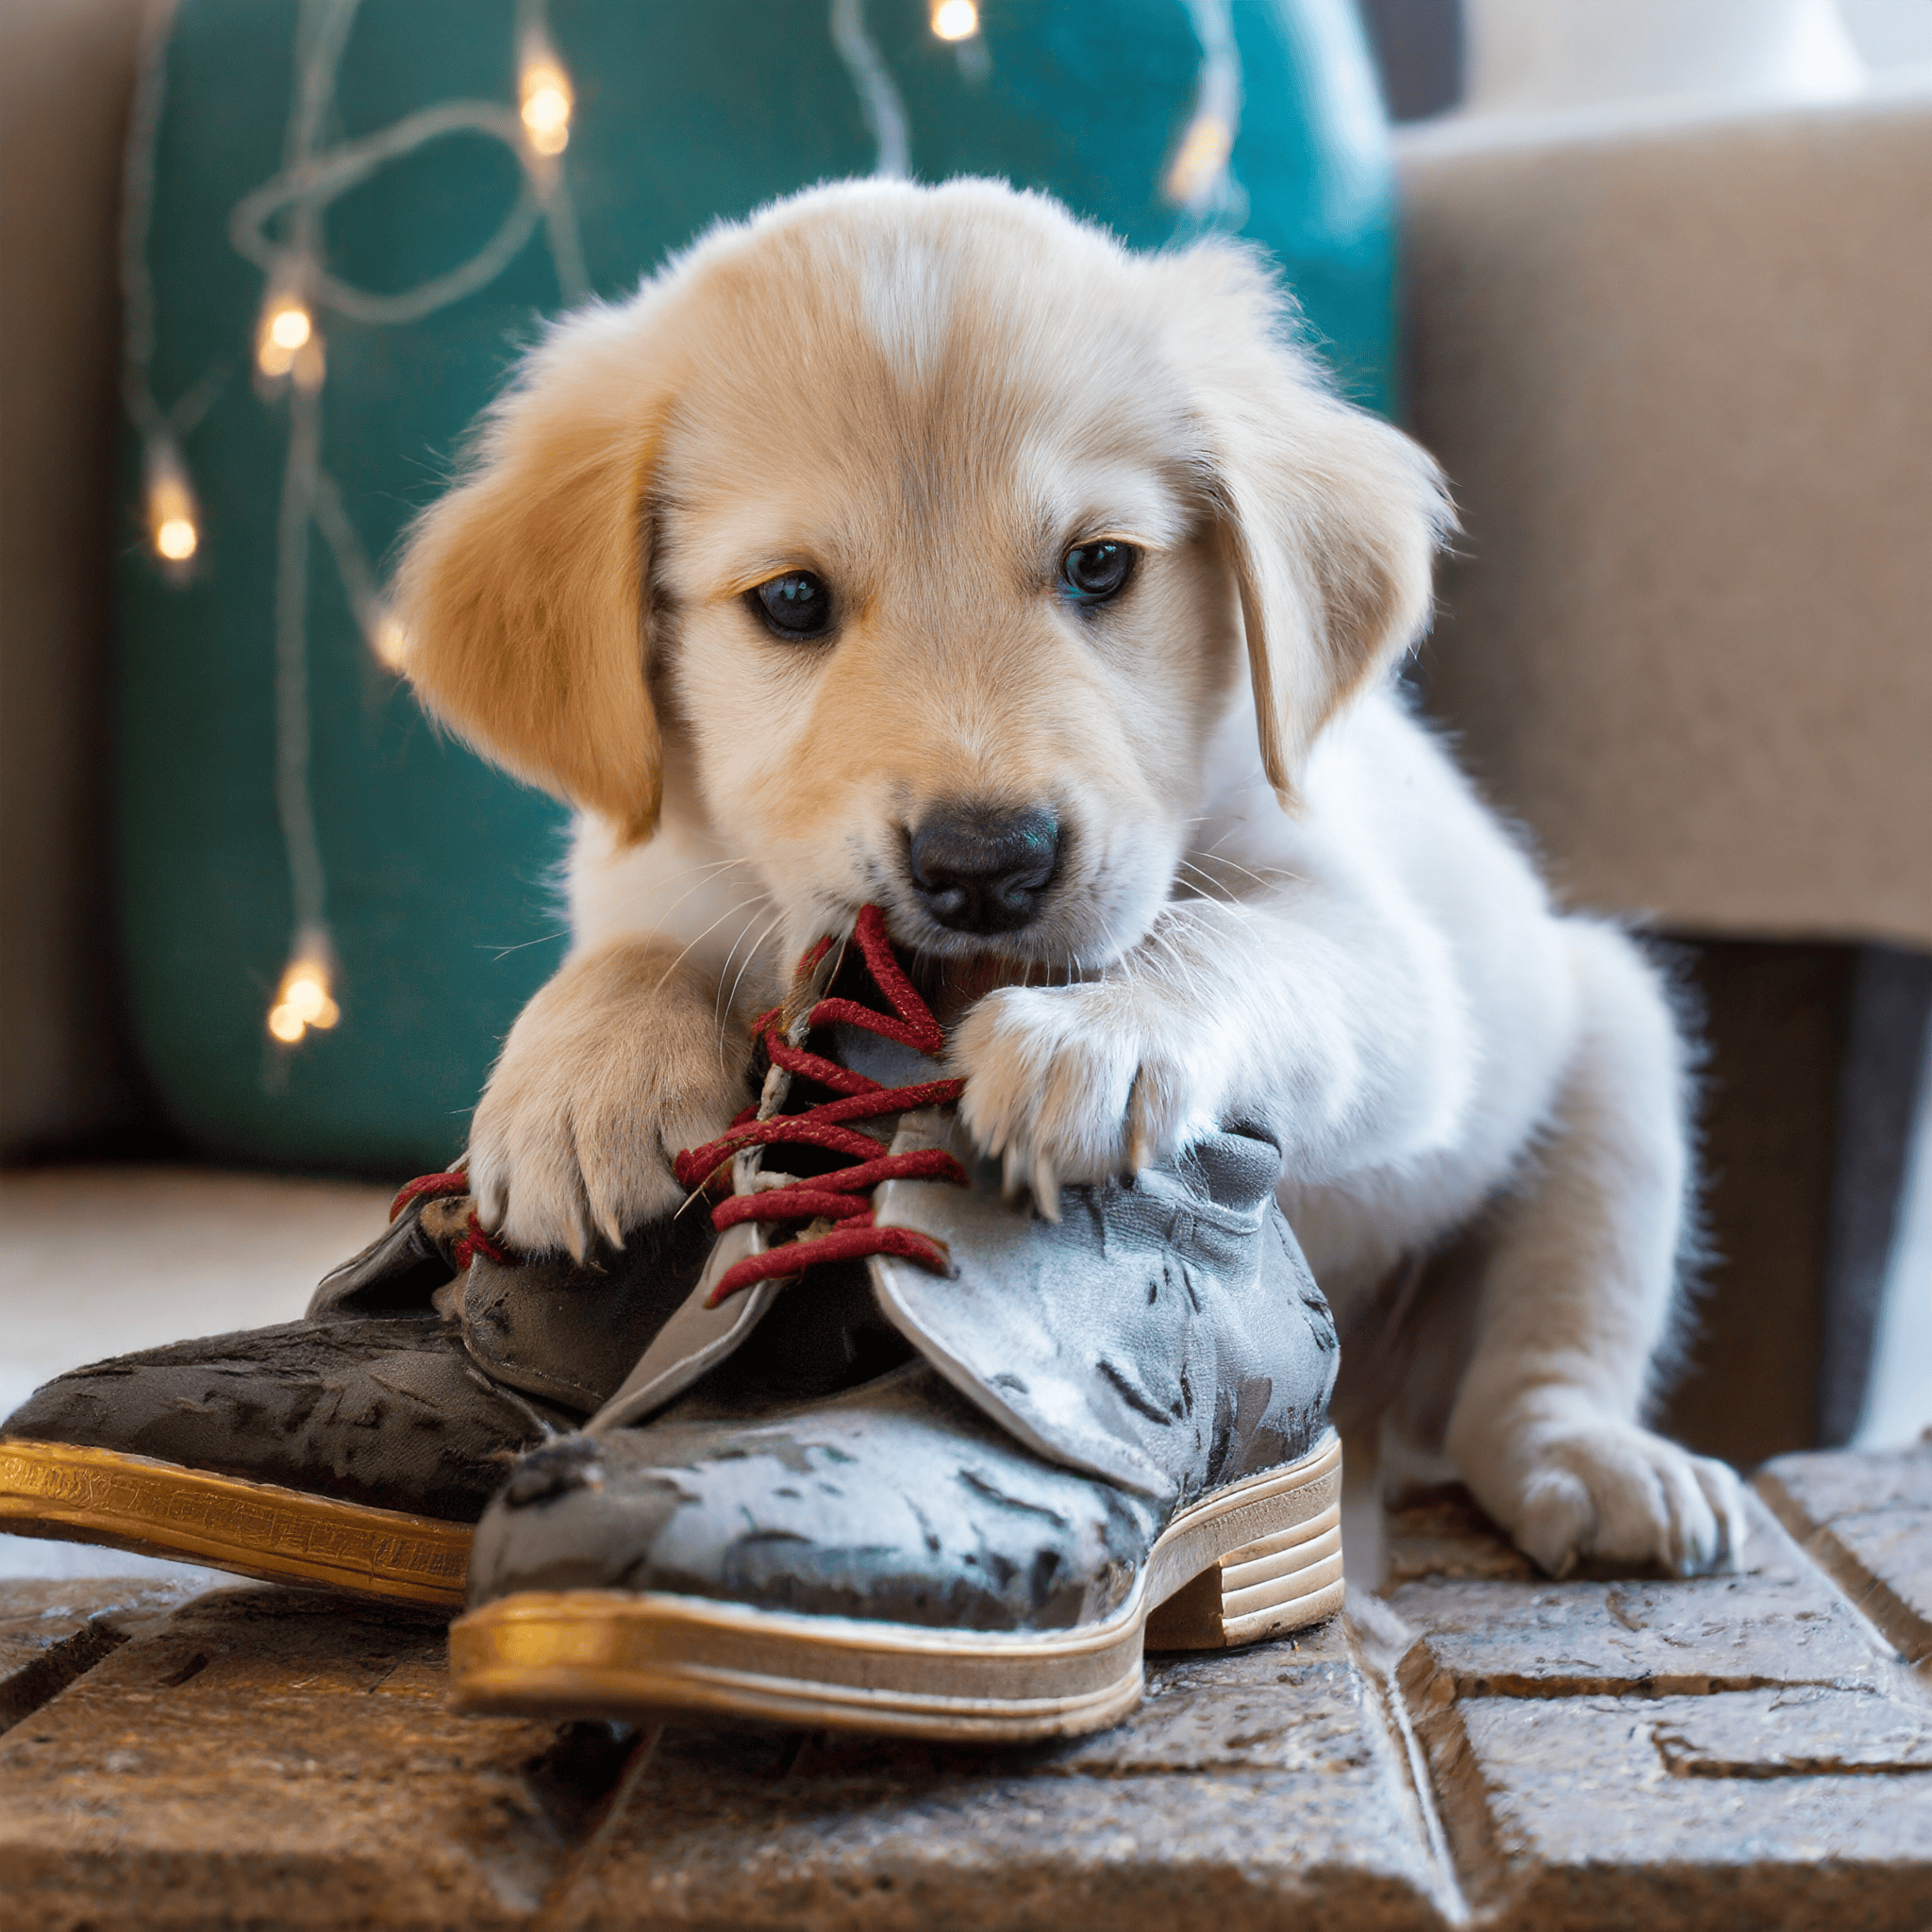 Start crate training before your new puppy eats all your shoes.